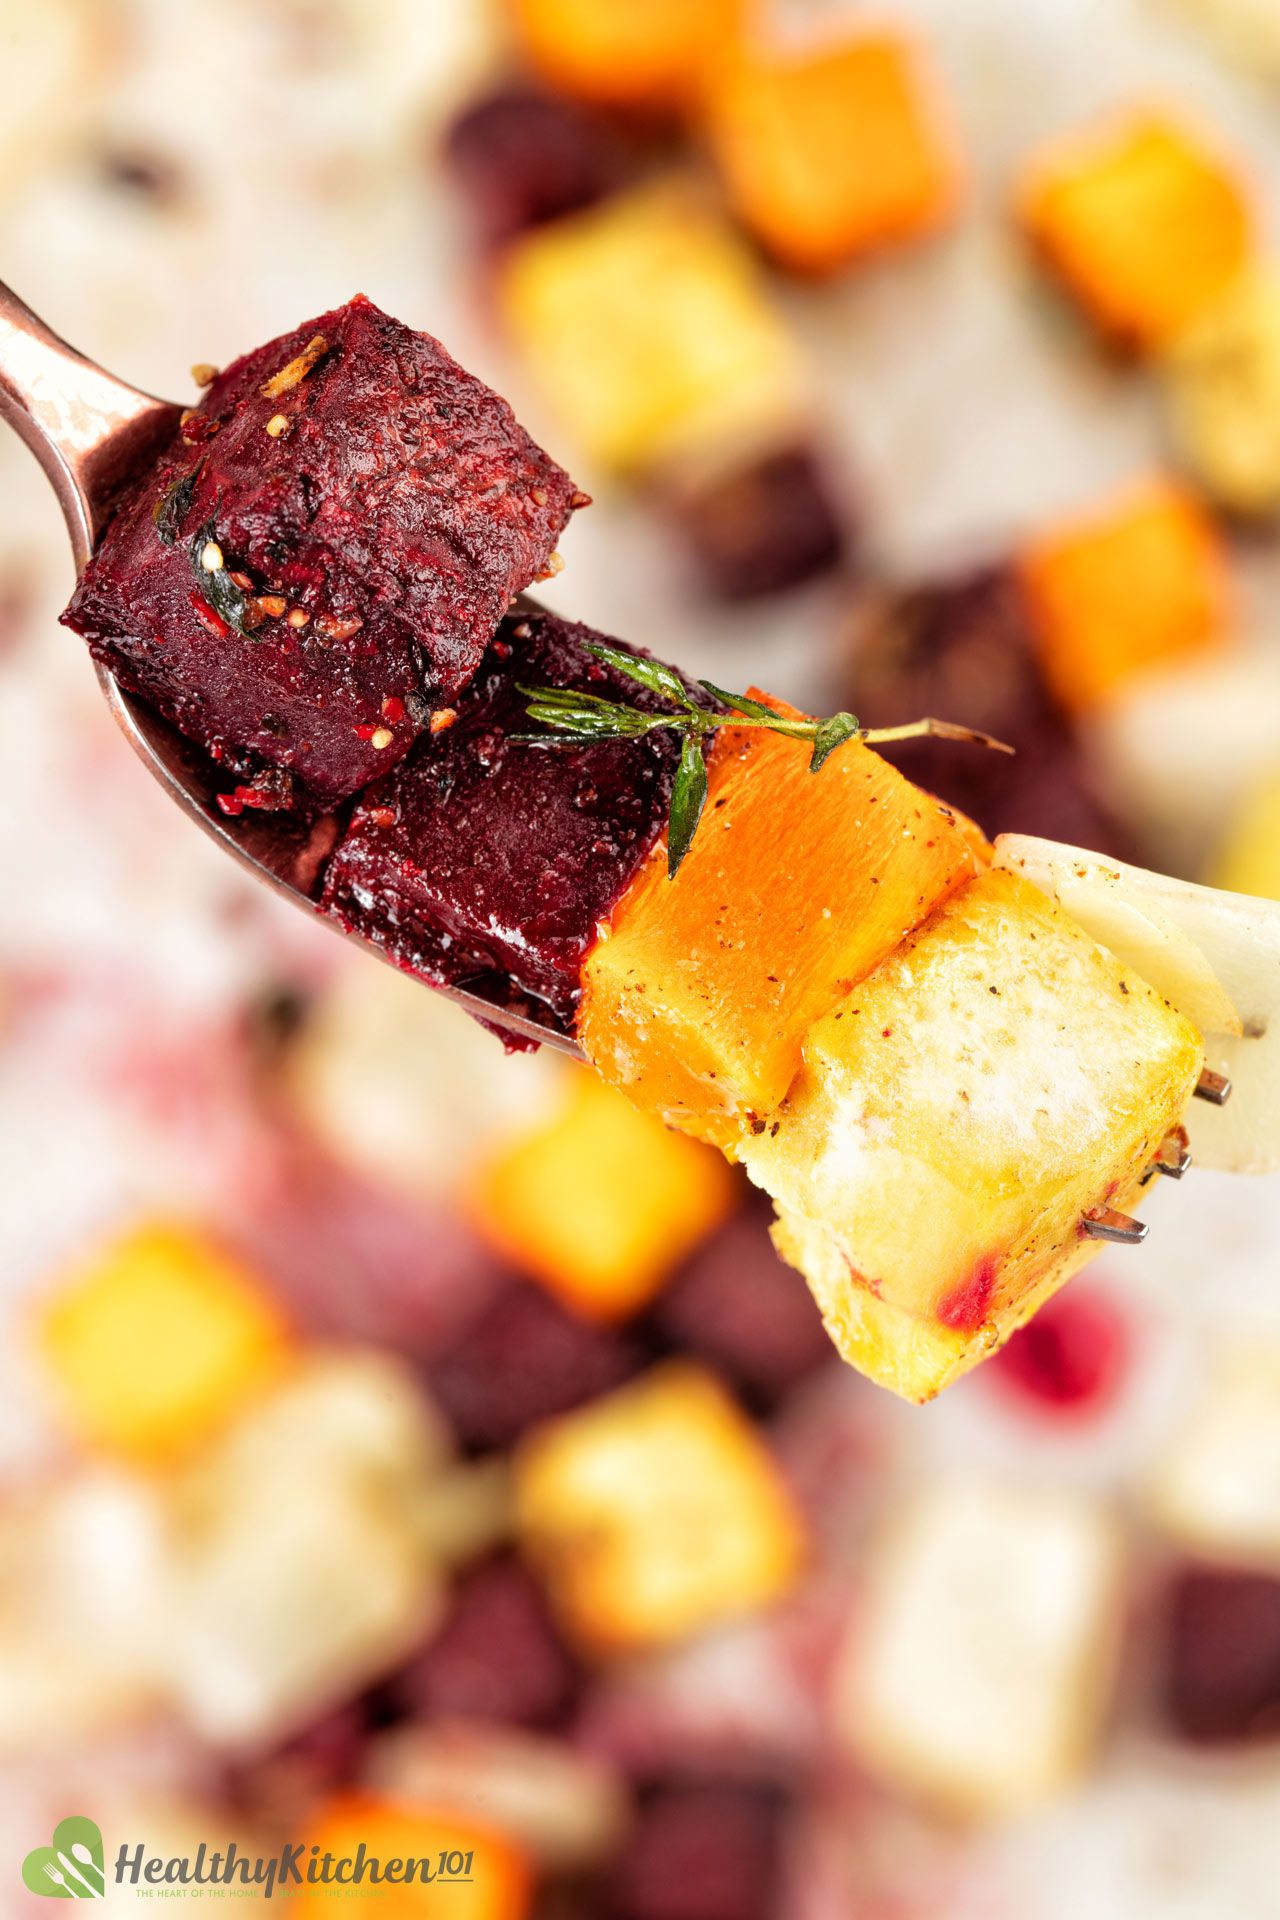 How to make Roasted Beets